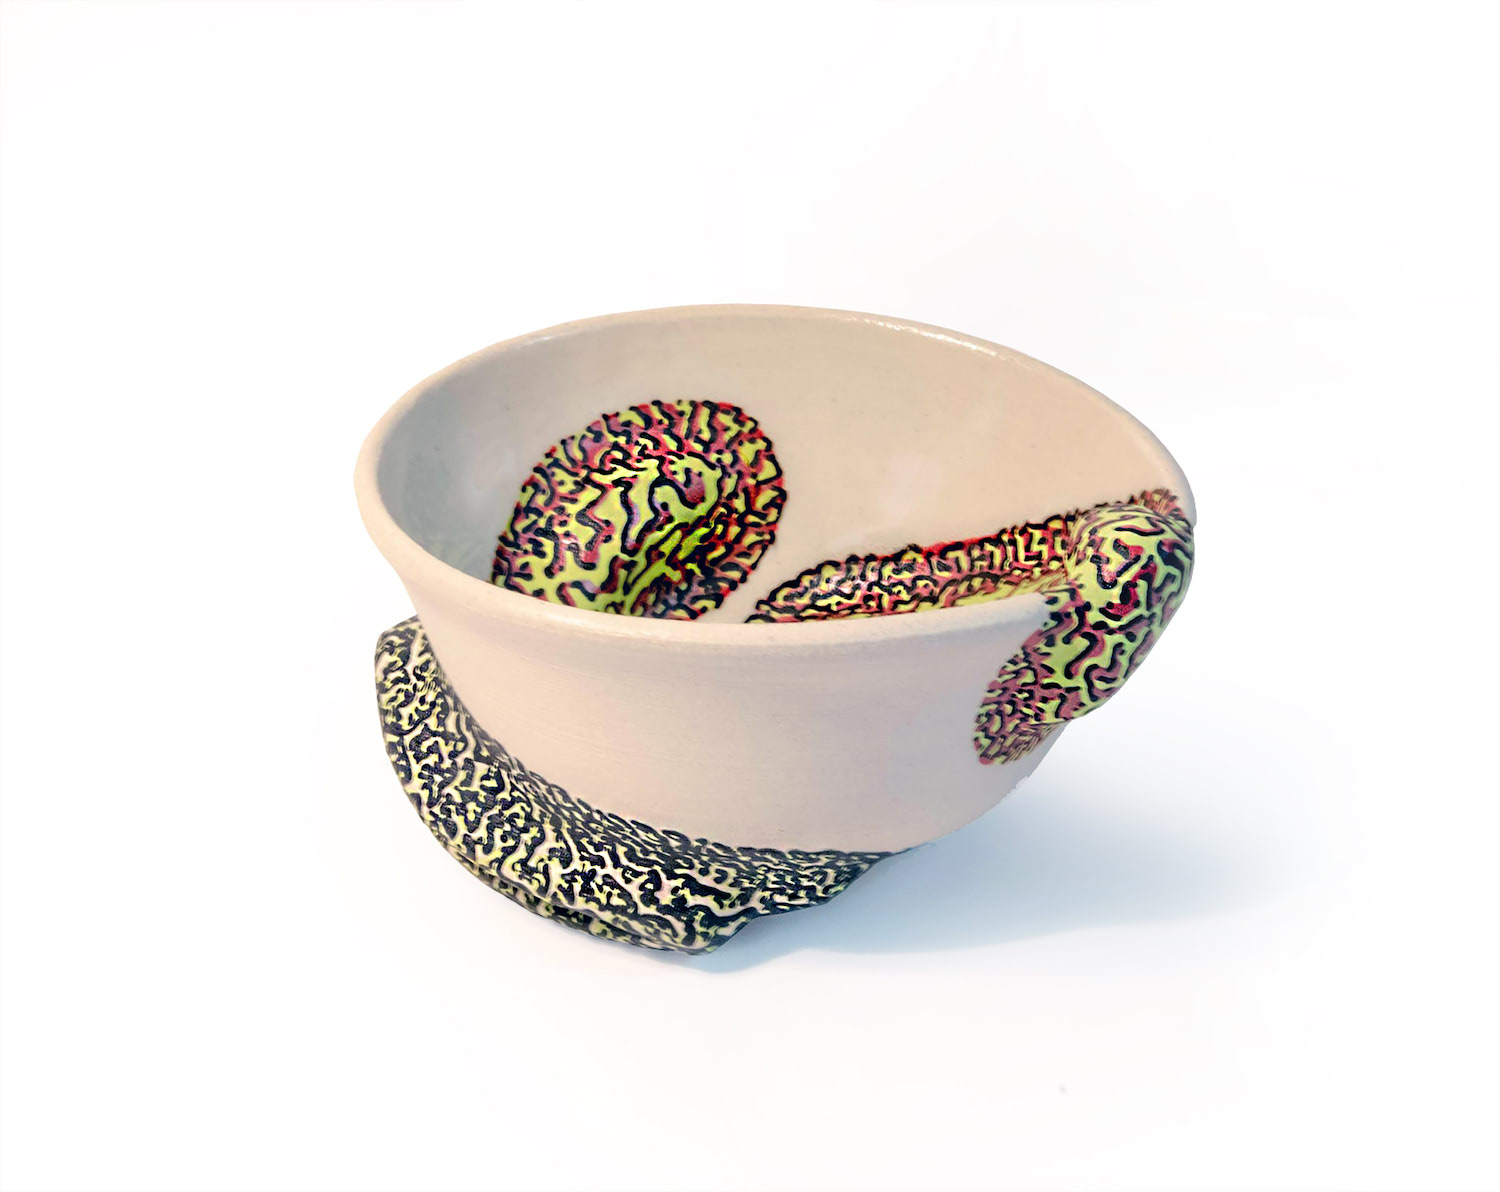 An image of a white bowl form with a light green, red, and black line pattern that covers sculptural surface additions that move from the exterior to the interior.